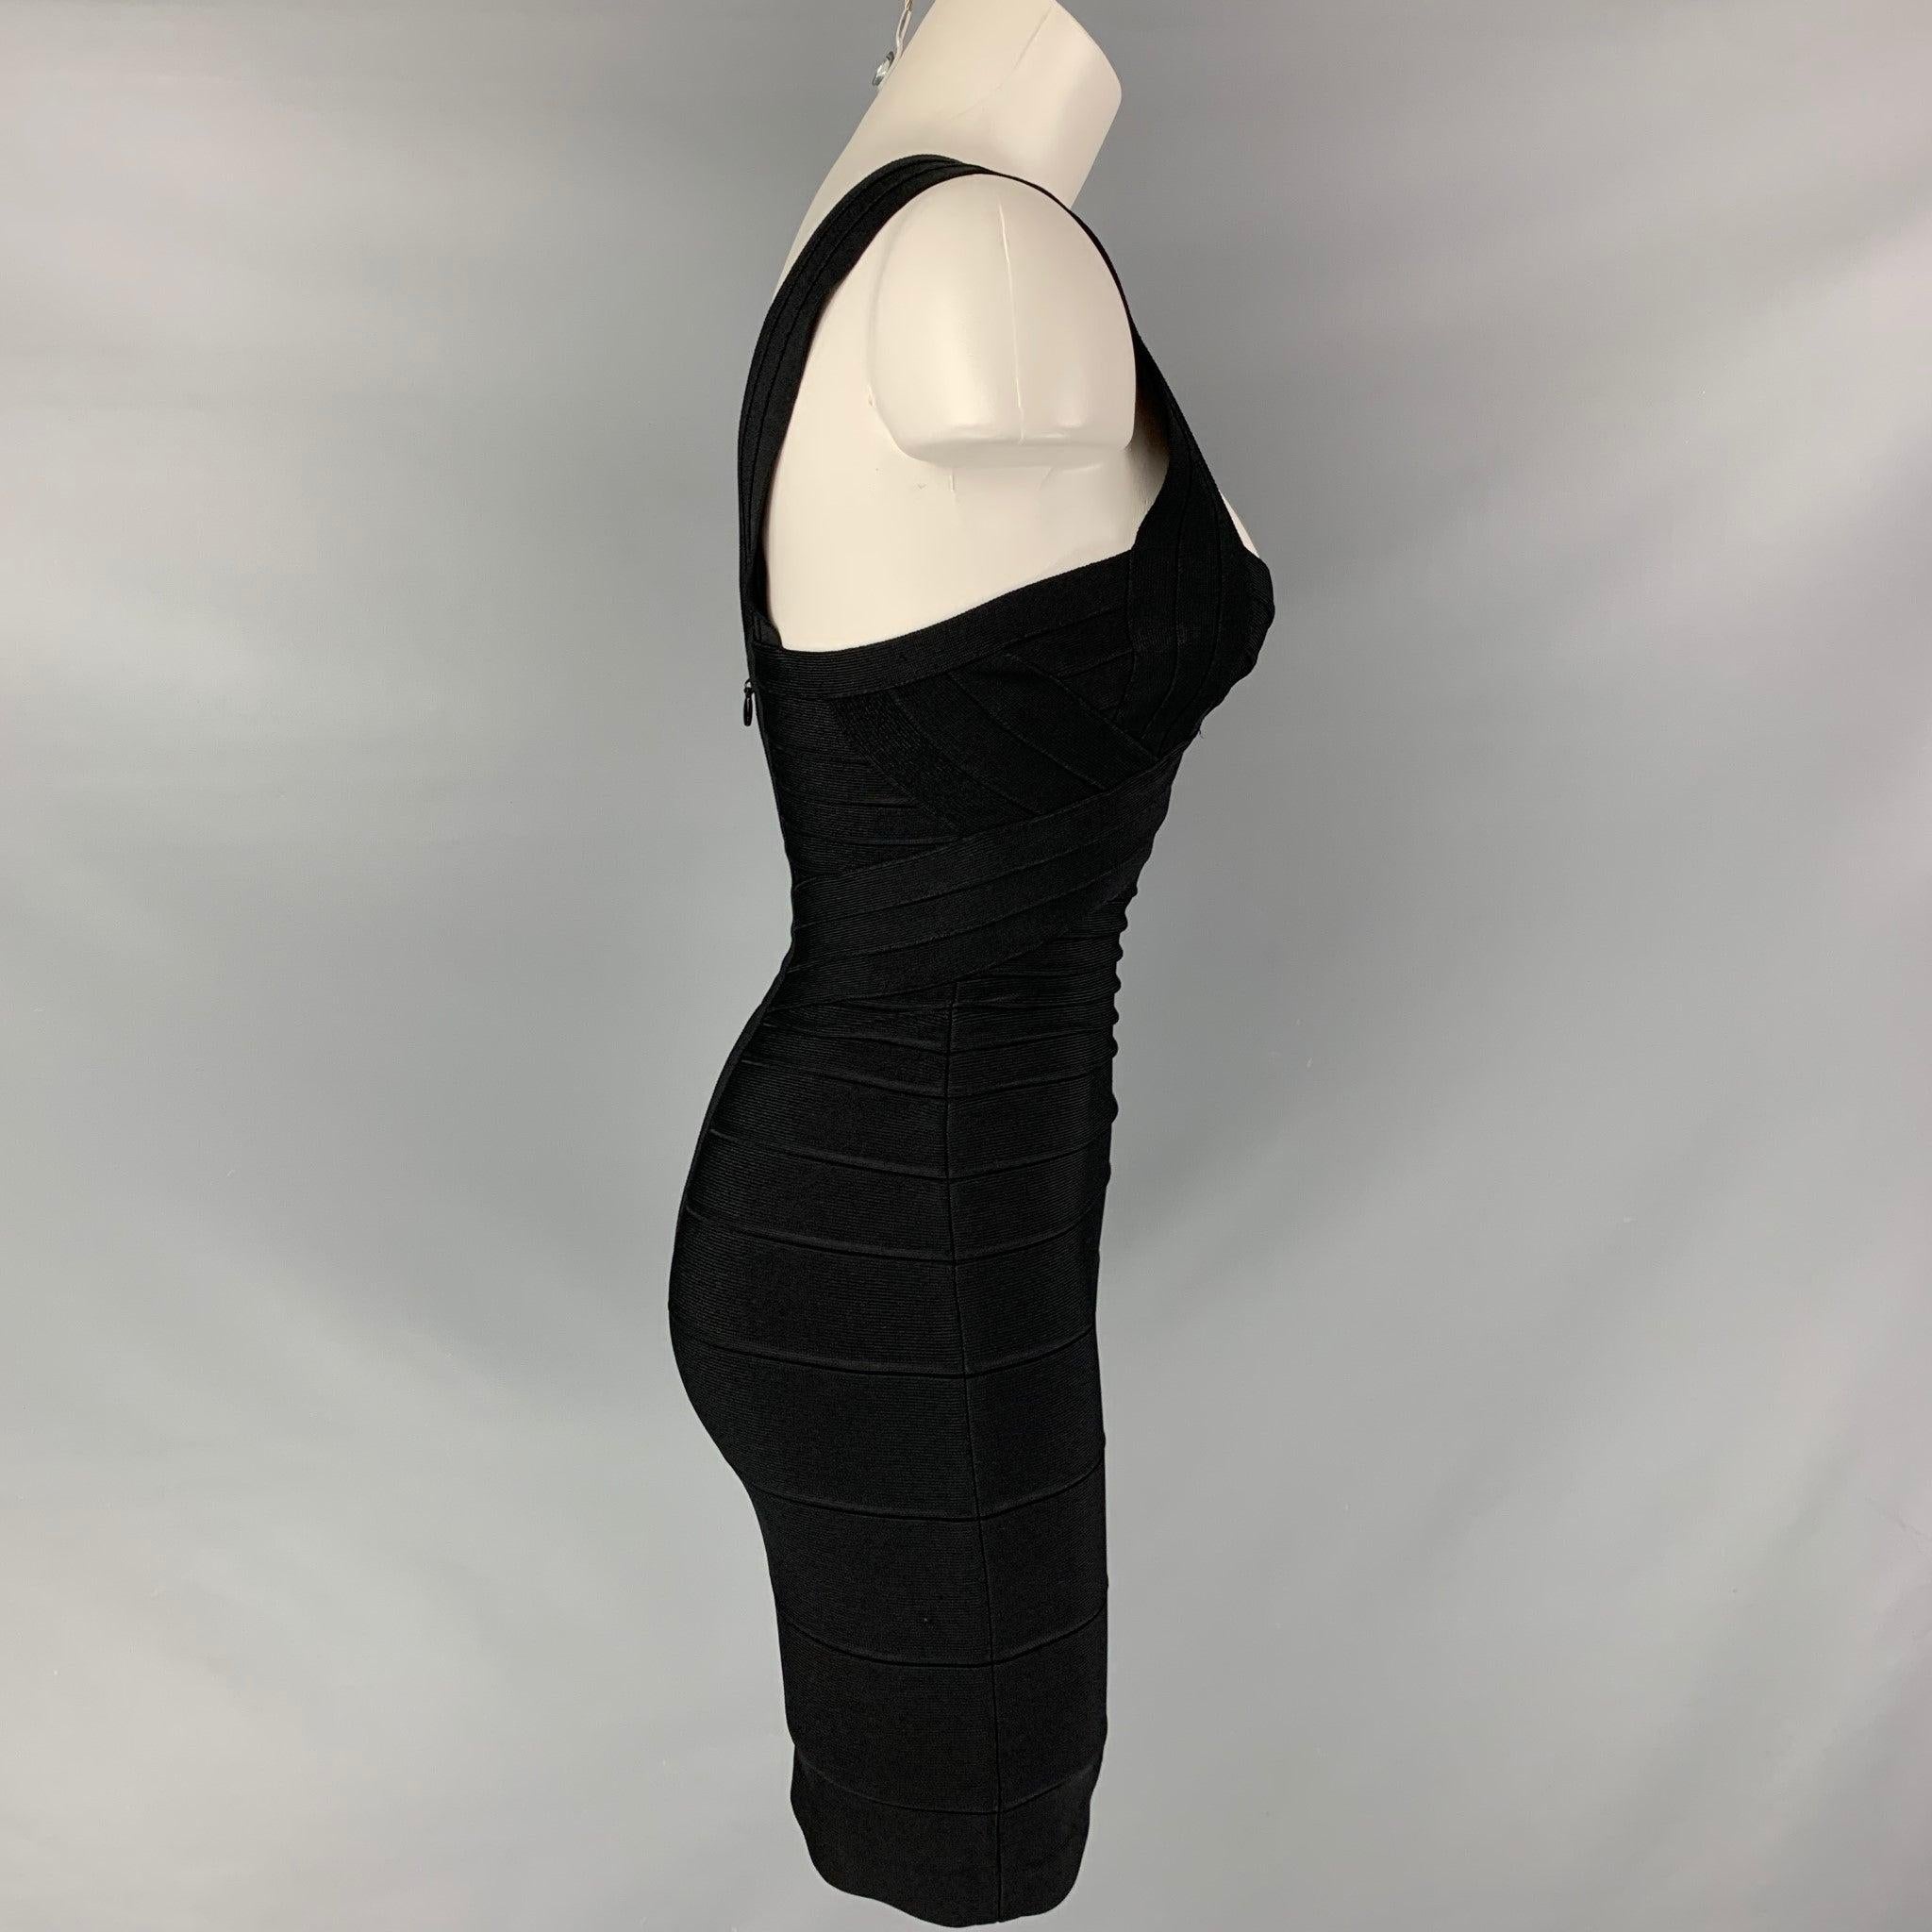 HERVE LEGER cocktail dress comes in black rayon blend knit fabric featuring a sleeveless, bodycon shape, v- neck, and a back zipper closure.Excellent Pre-Owned Condition.
  
 

 Marked:  XS 
 

 Measurements: 
  Bust: 28 inches Waist: 24 inches Hip: